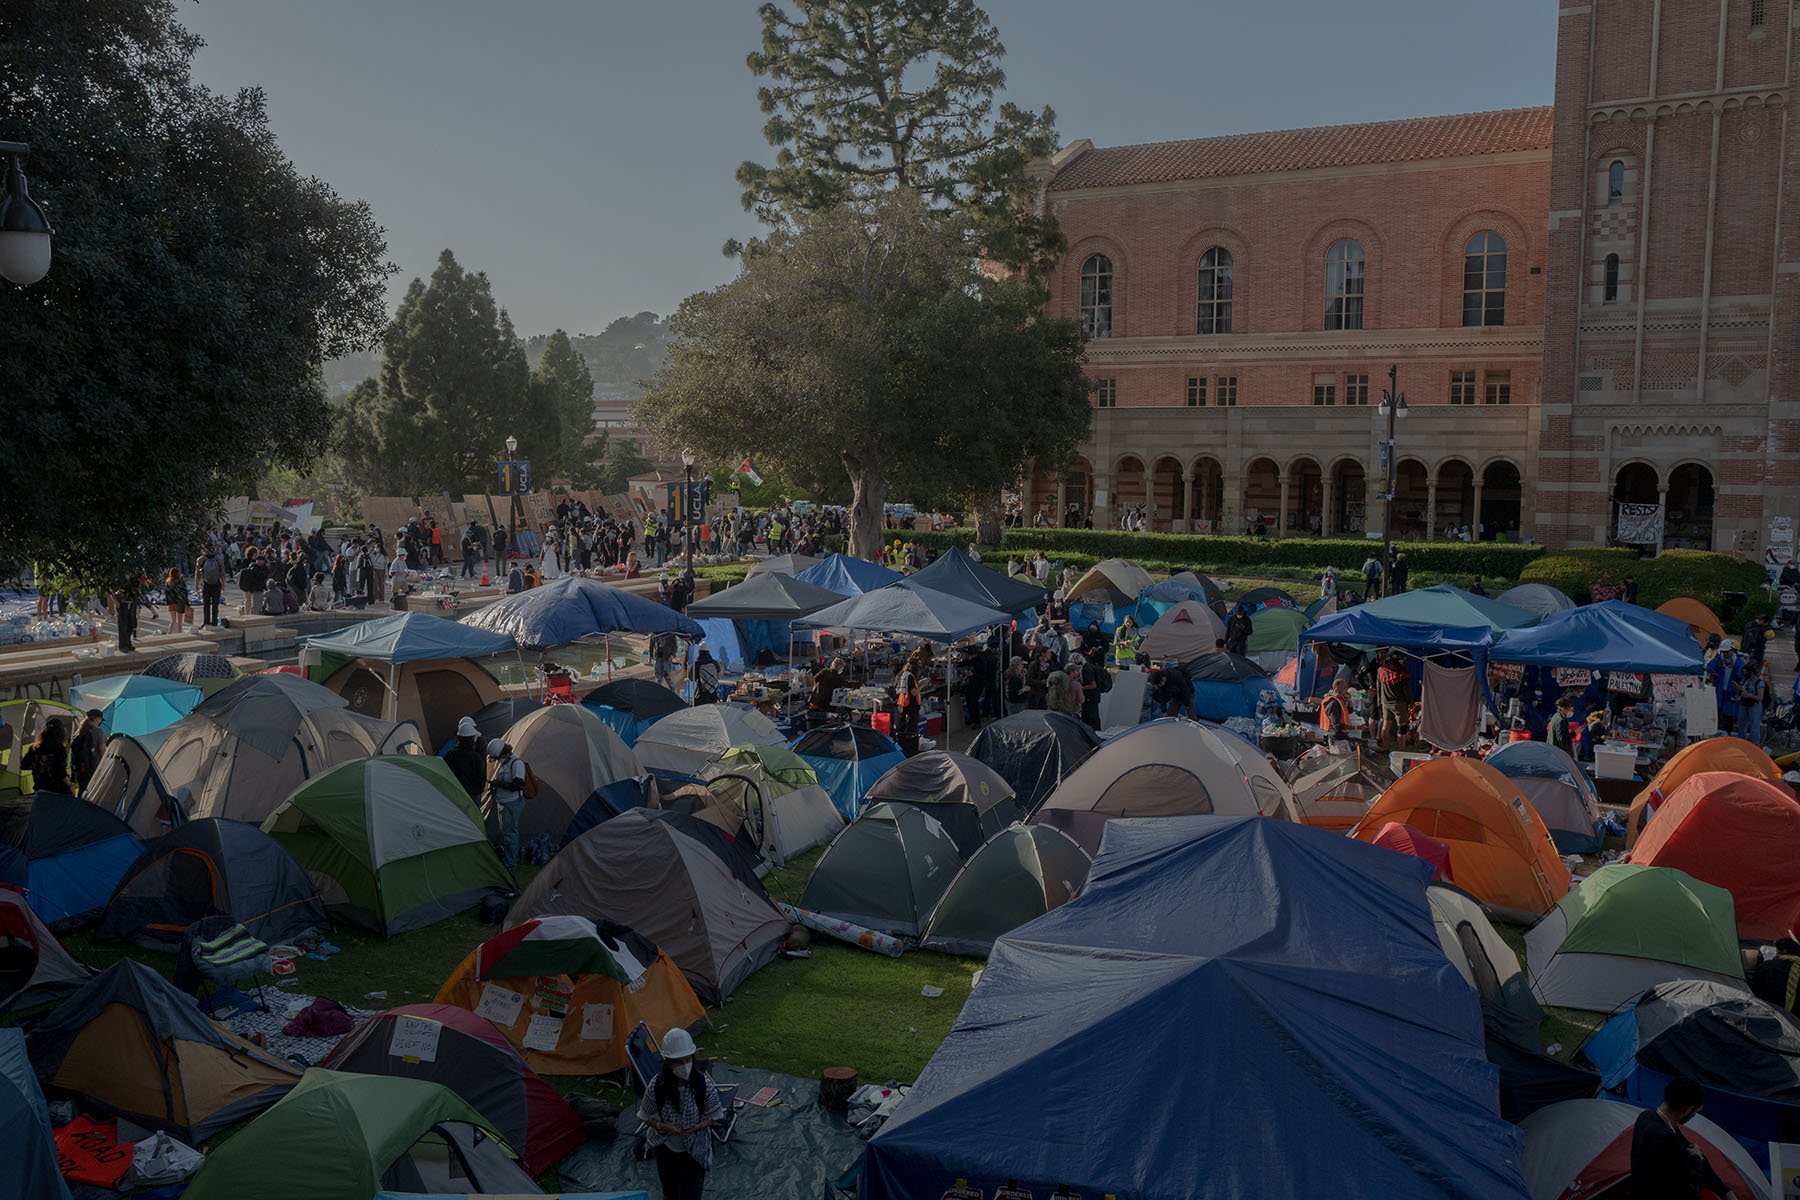 Tents and students are seen at the UCLA encampment on the UCLA campus.